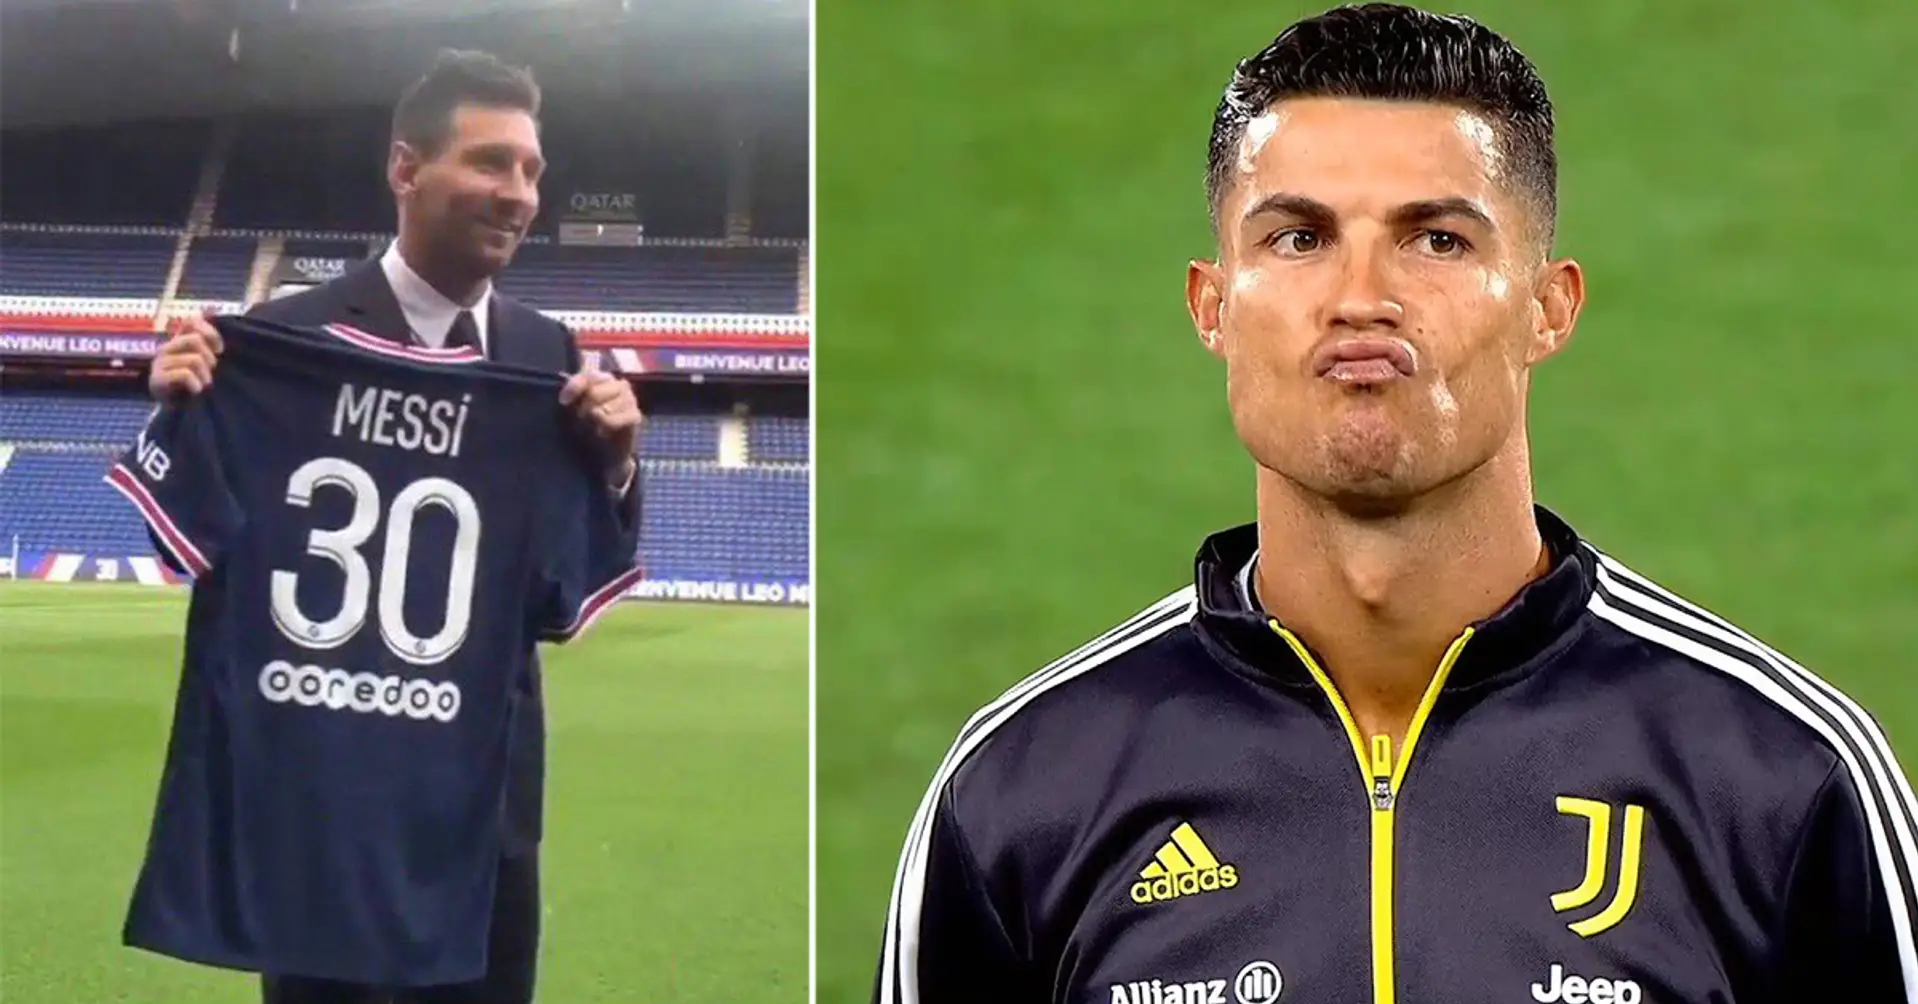 Ligue 1 player asks Cristiano to join Lille to compete with Messi. Ronaldo responds ‘Ha ha ha’